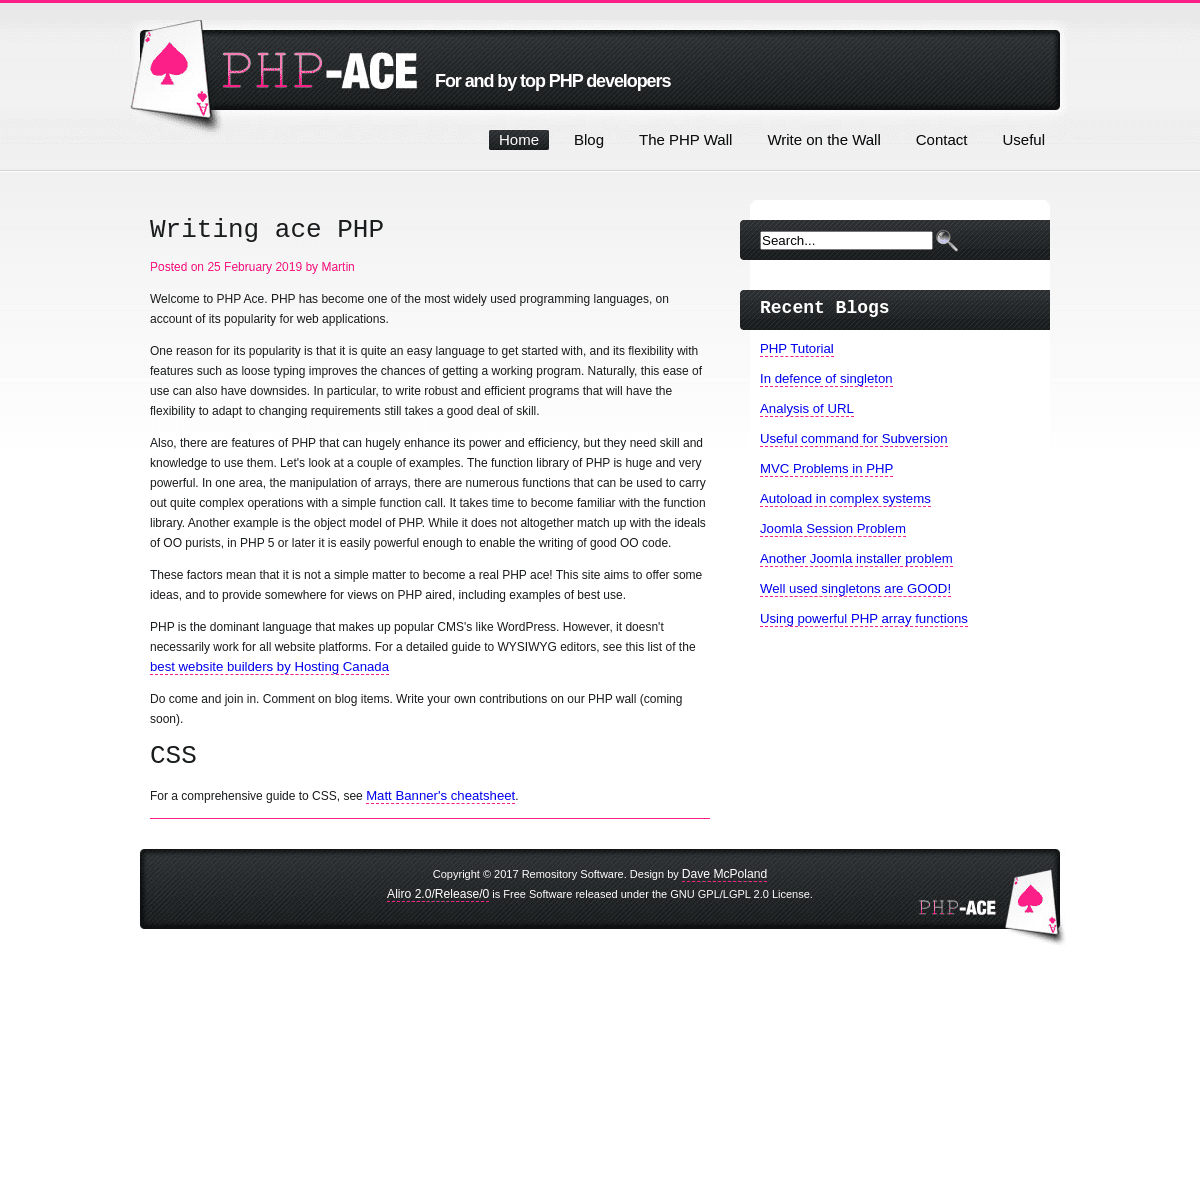 A complete backup of php-ace.com